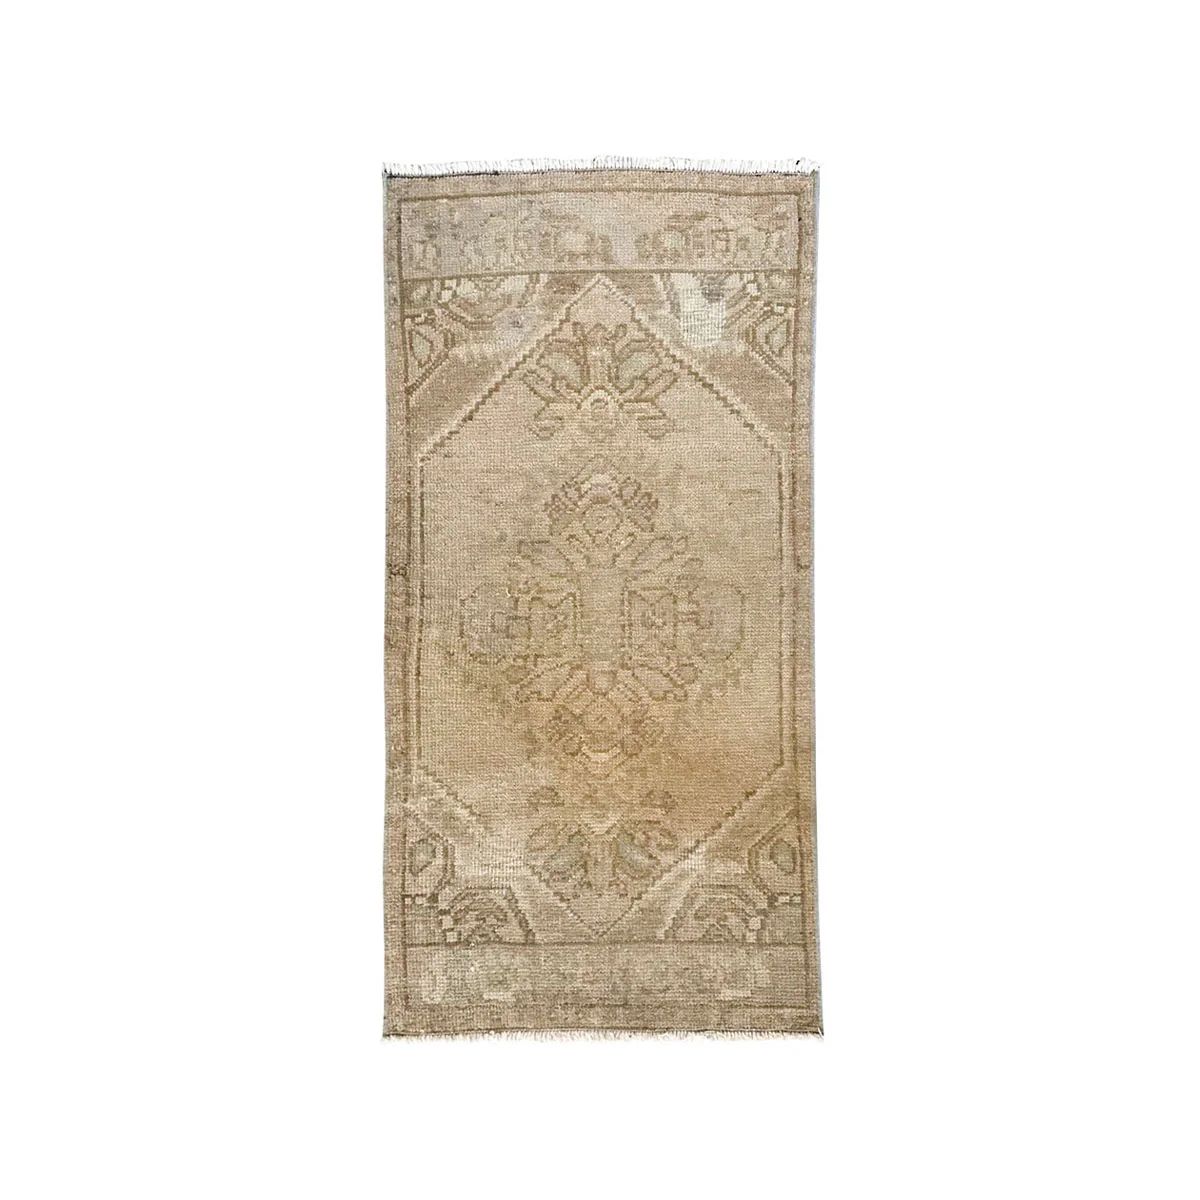 'Cort' Vintage Rug (2 x 3) | Tuesday Made